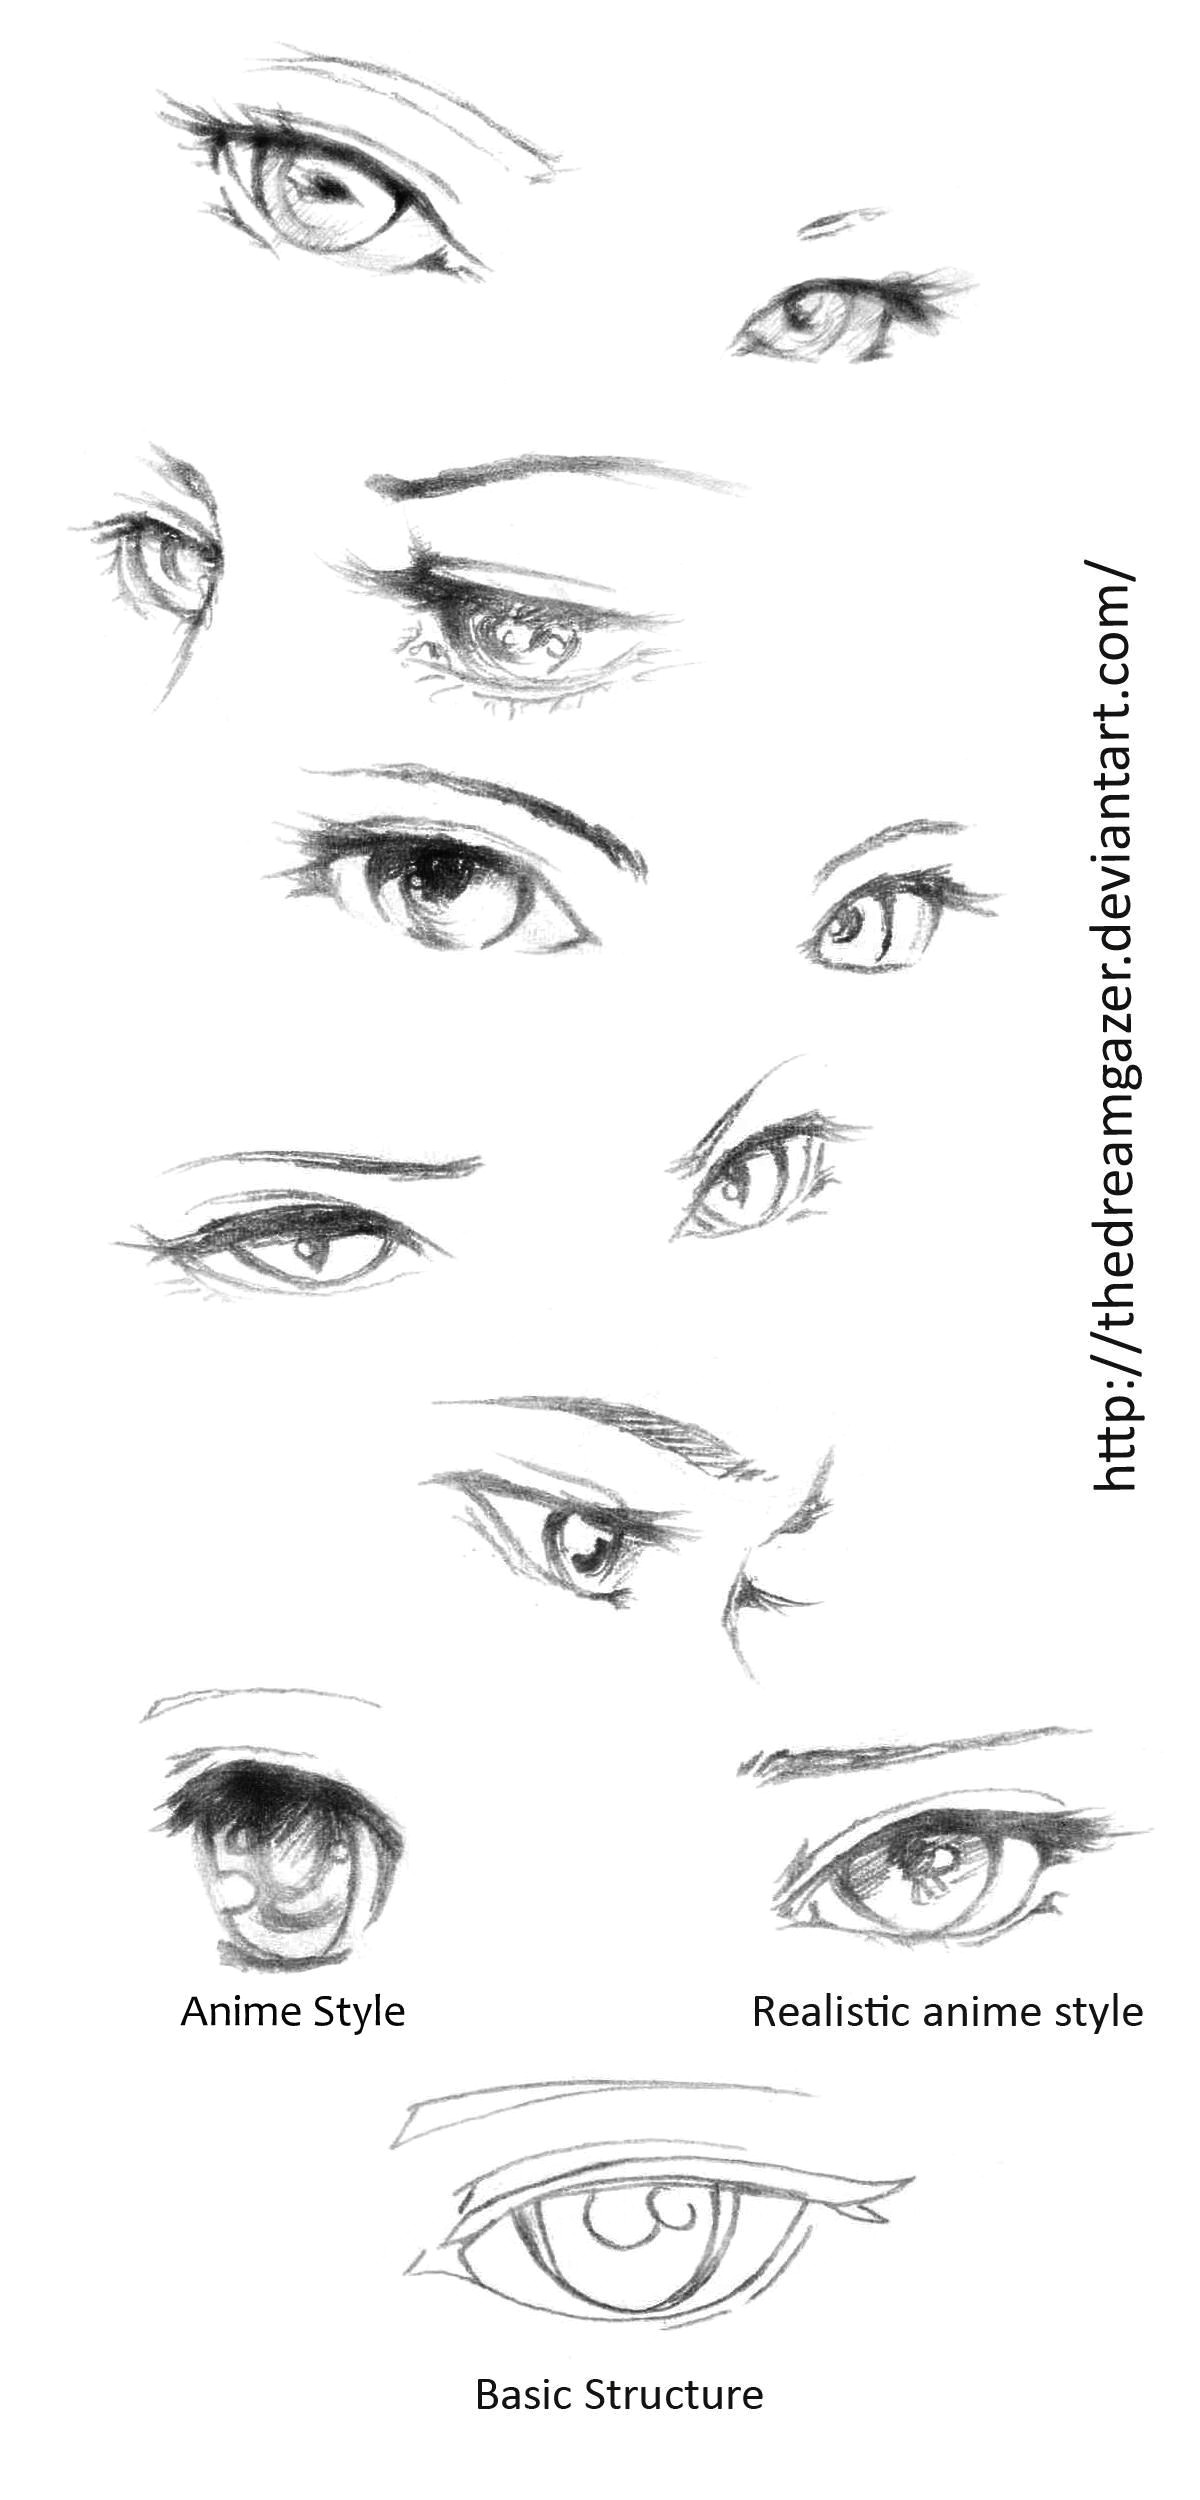 anime drawing tutorials anime drawing styles anime drawings sketches eye drawings anime